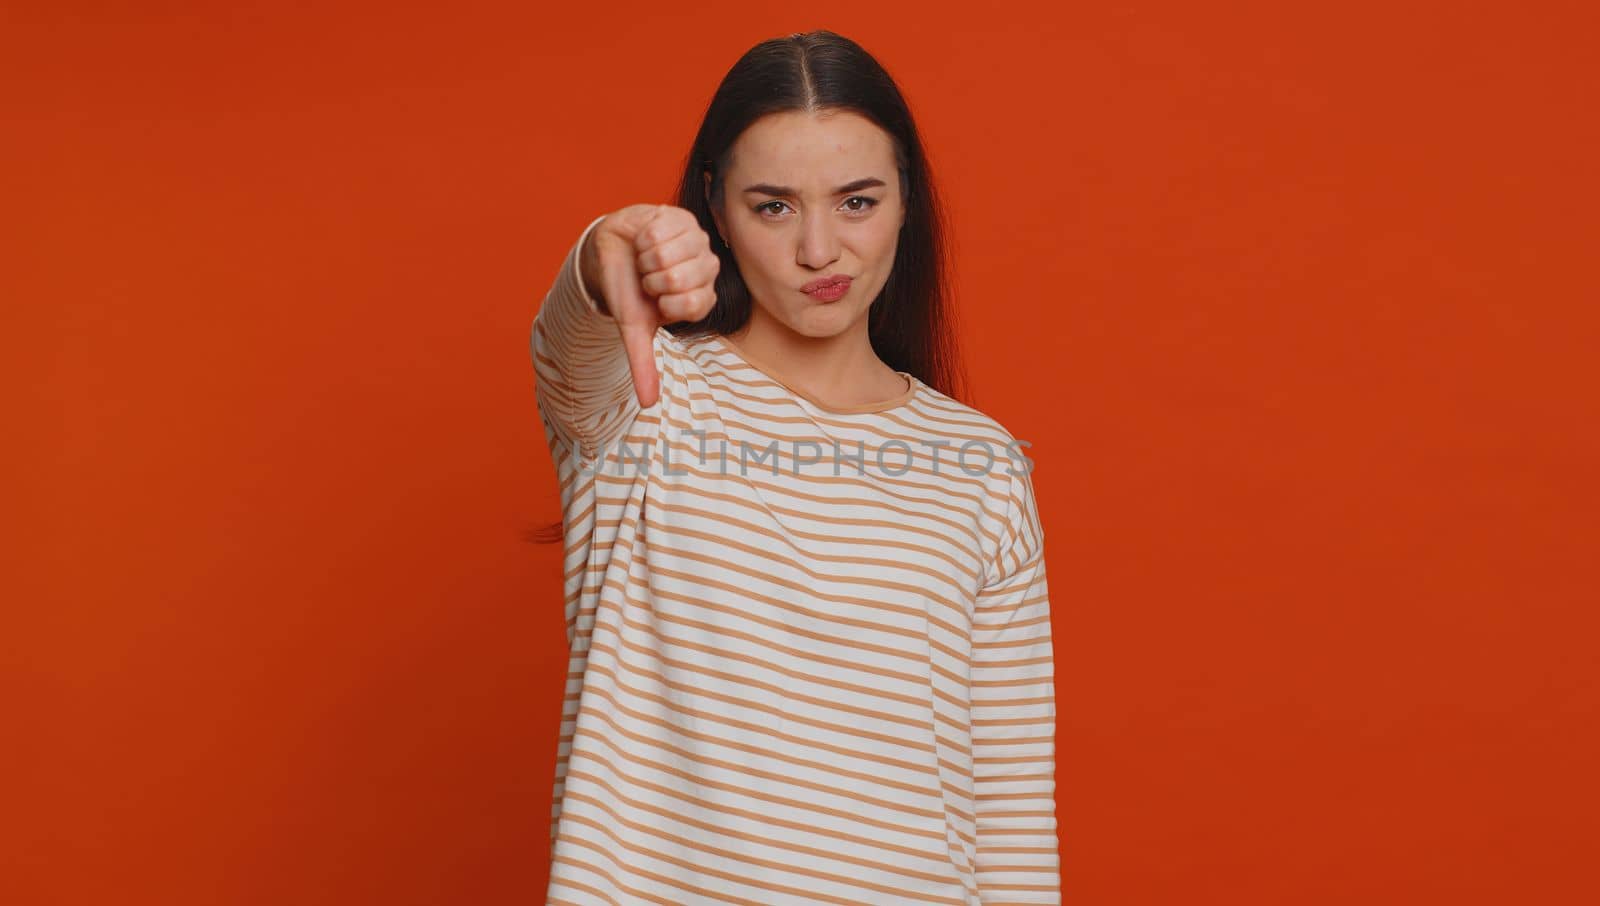 Dislike. Upset unhappy pretty woman in pullover showing thumbs down sign gesture, expressing discontent, disapproval, dissatisfied, dislike. Young adult girl. Indoor studio shot on red background